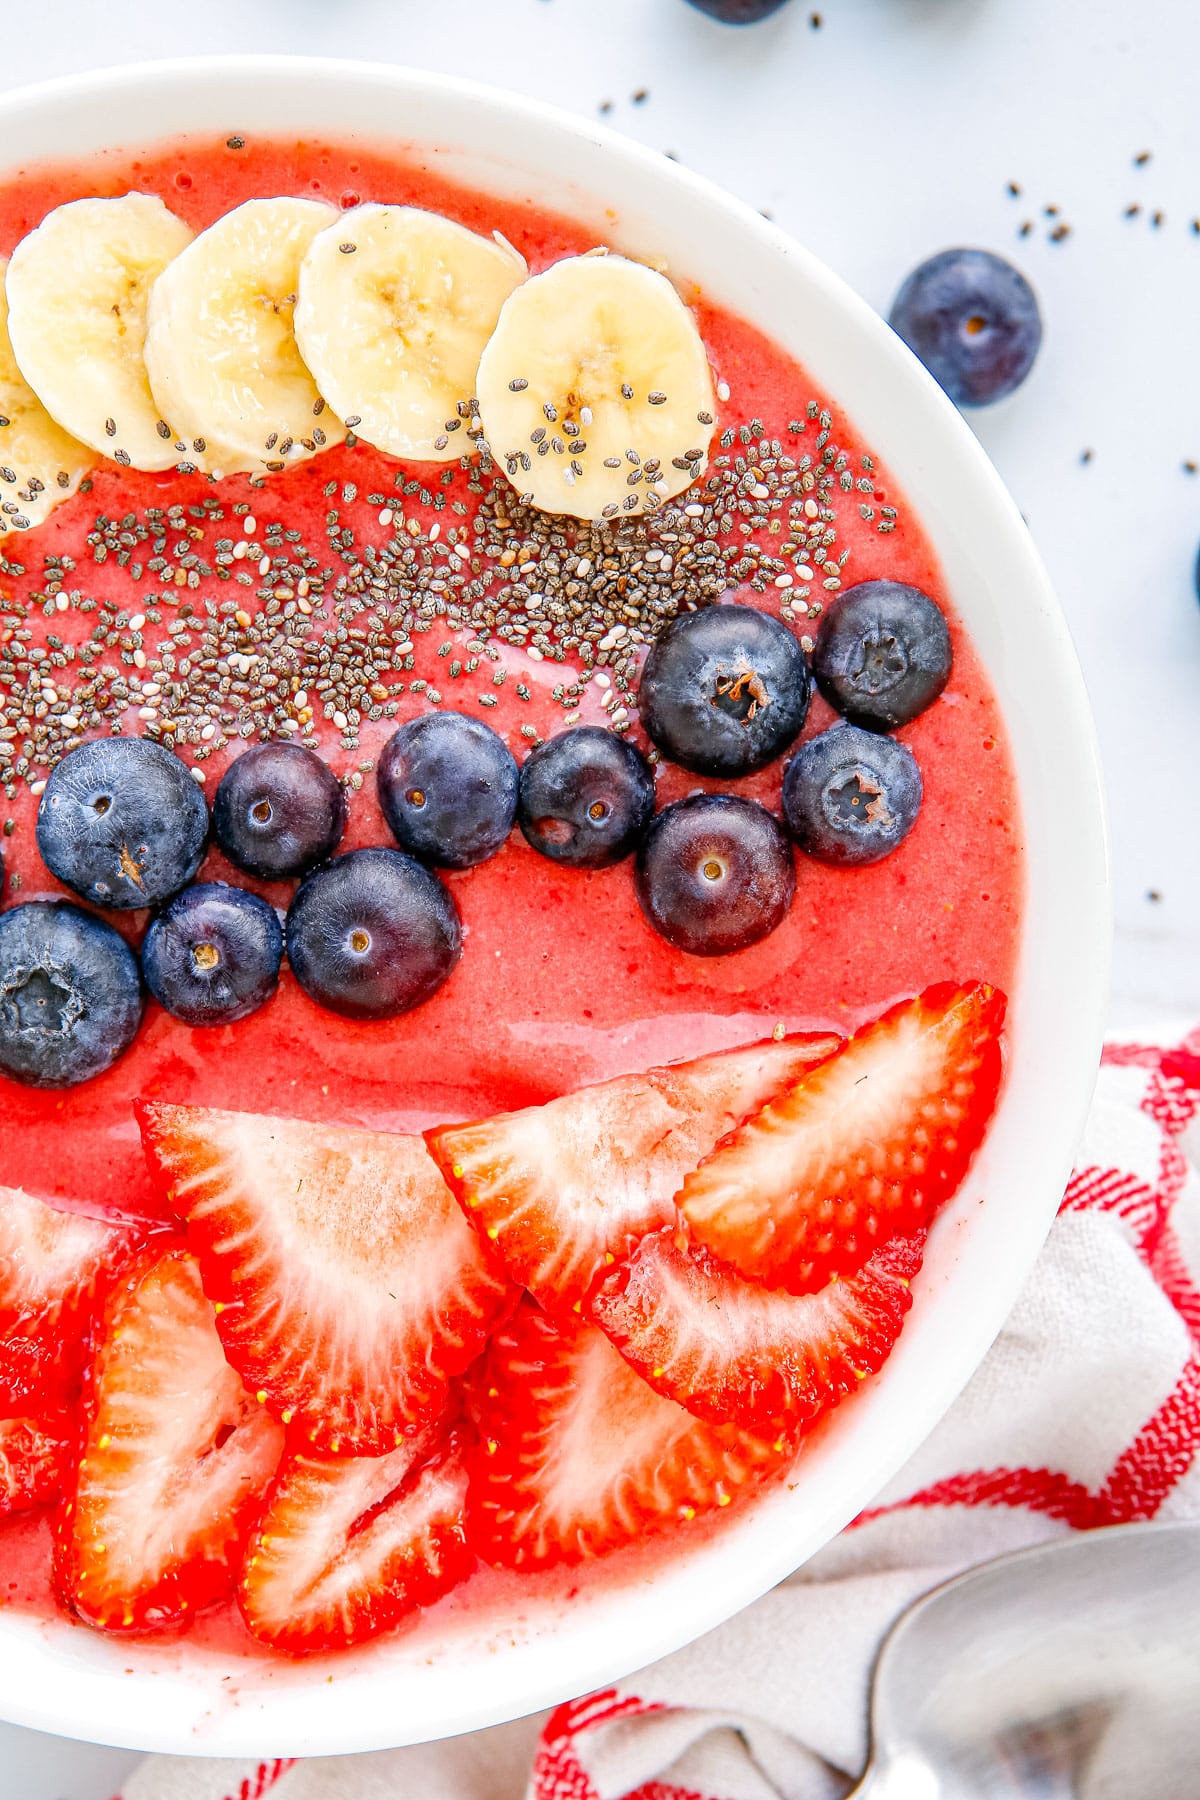 A close up picture of the finished Strawberry Banana Smoothie Bowl.